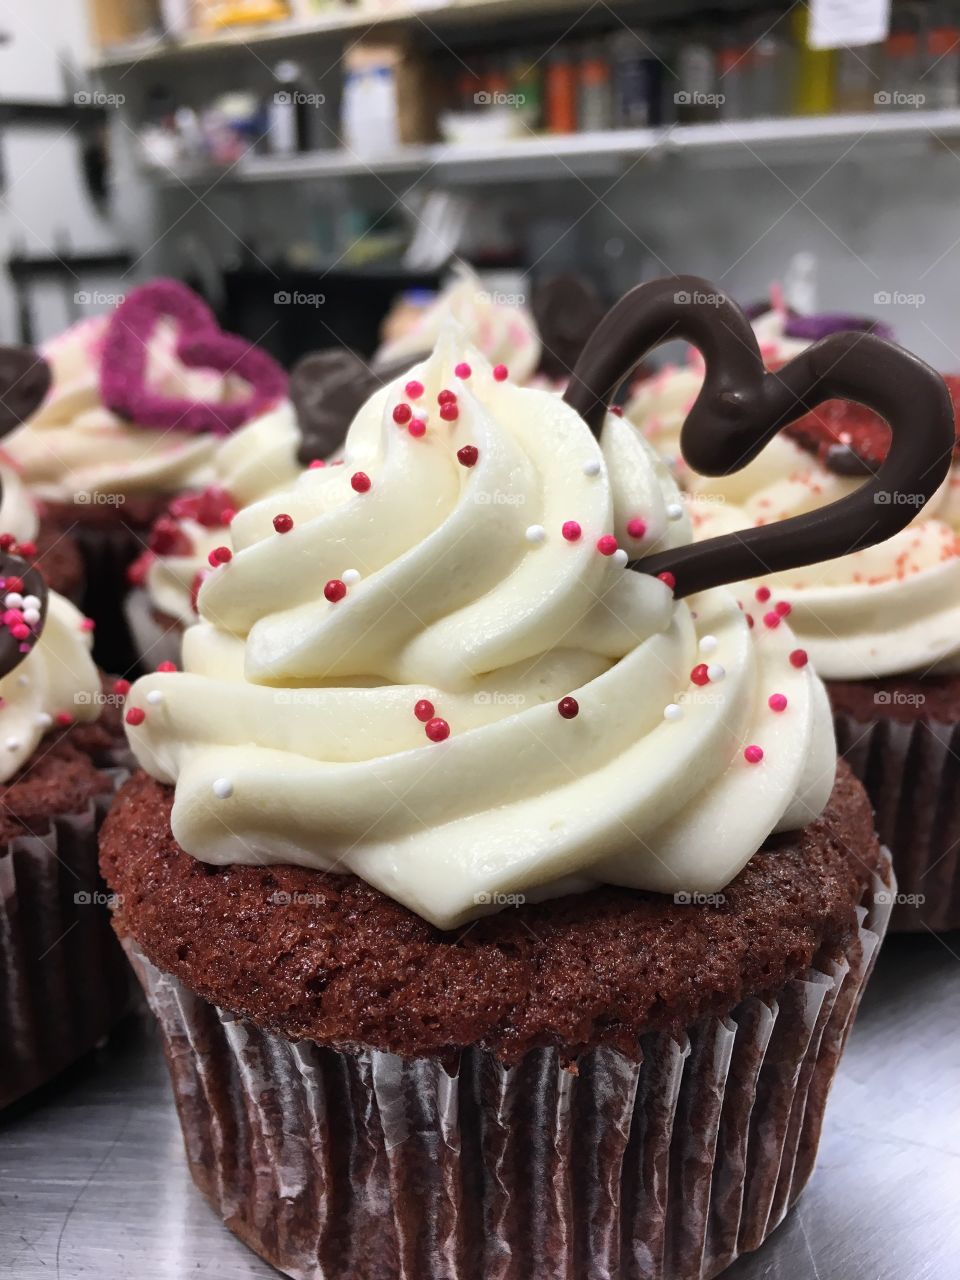 Red velvet cupcakes for Valentine's day! With cream cheese frosting topped with sprinkles and a chocolate heart. 